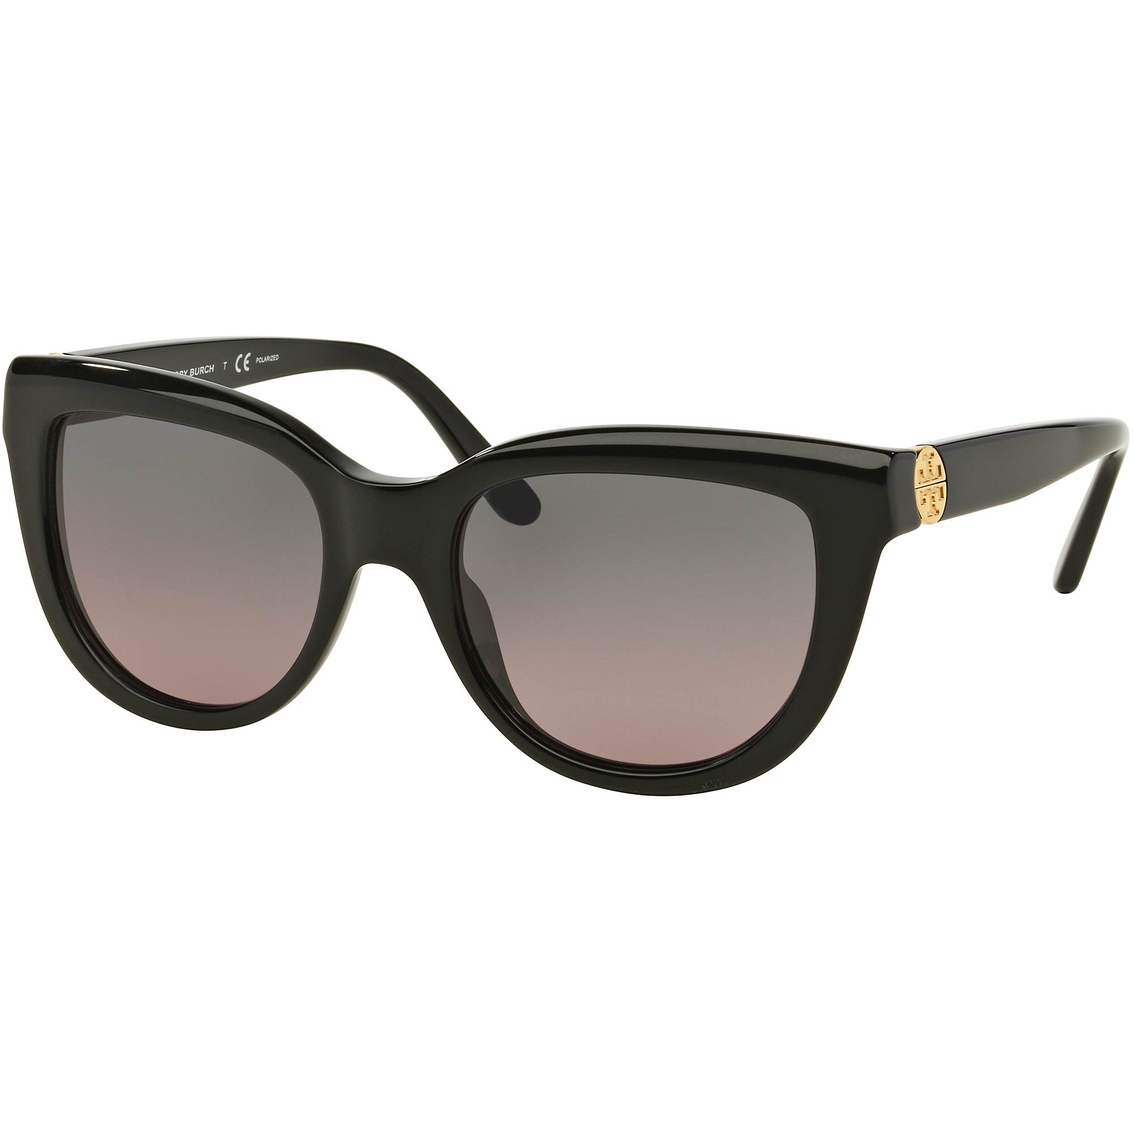 Tory Burch Sunglasses 0ty7088 | Atg Archive | Shop The Exchange